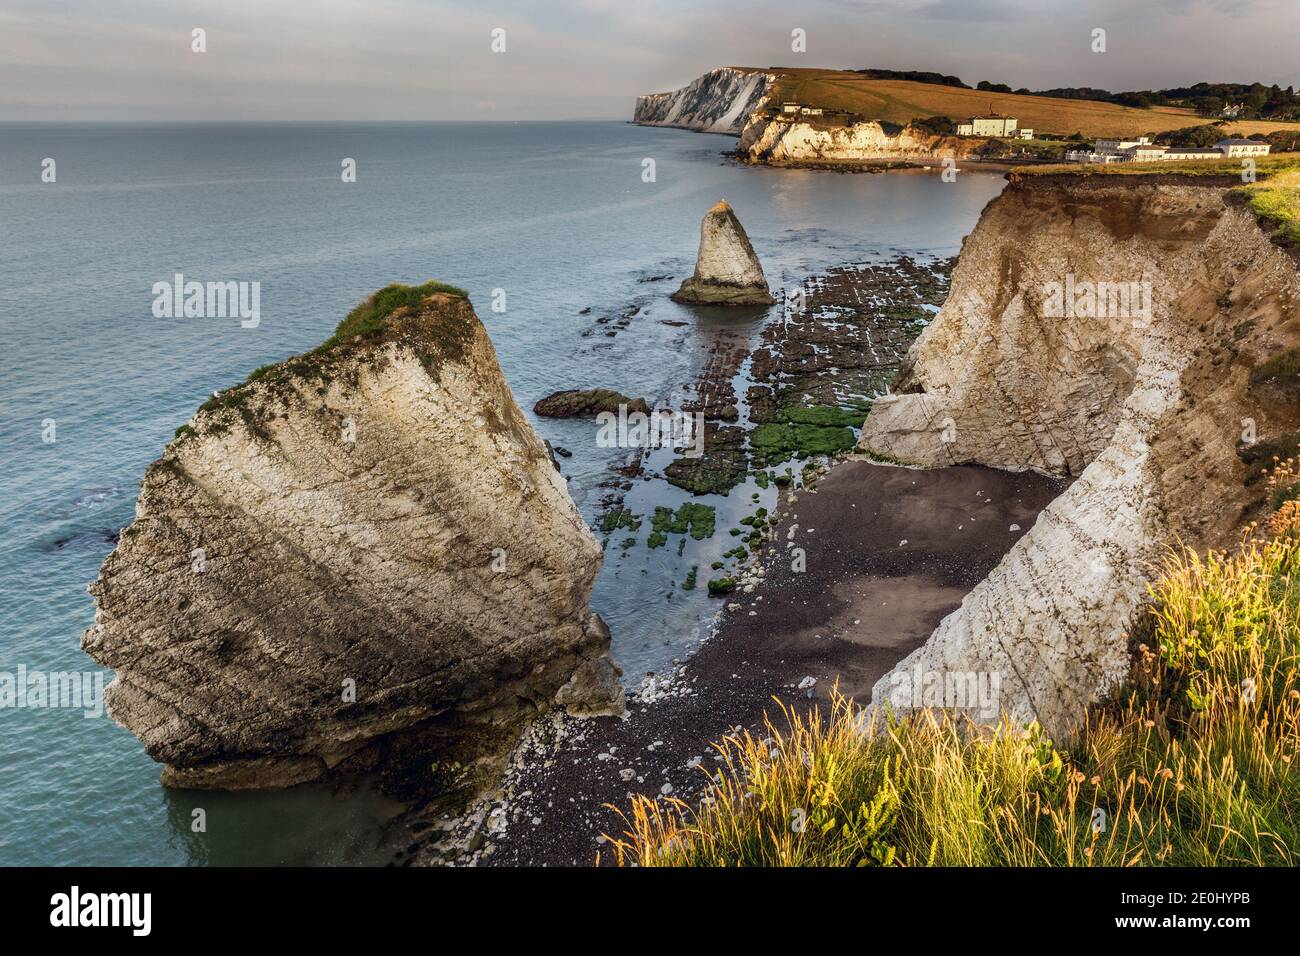 Sea stacks at Freshwater Bay on the Isle of Wight, England, Uk. Looking west towards Tennyson Down. Stock Photo